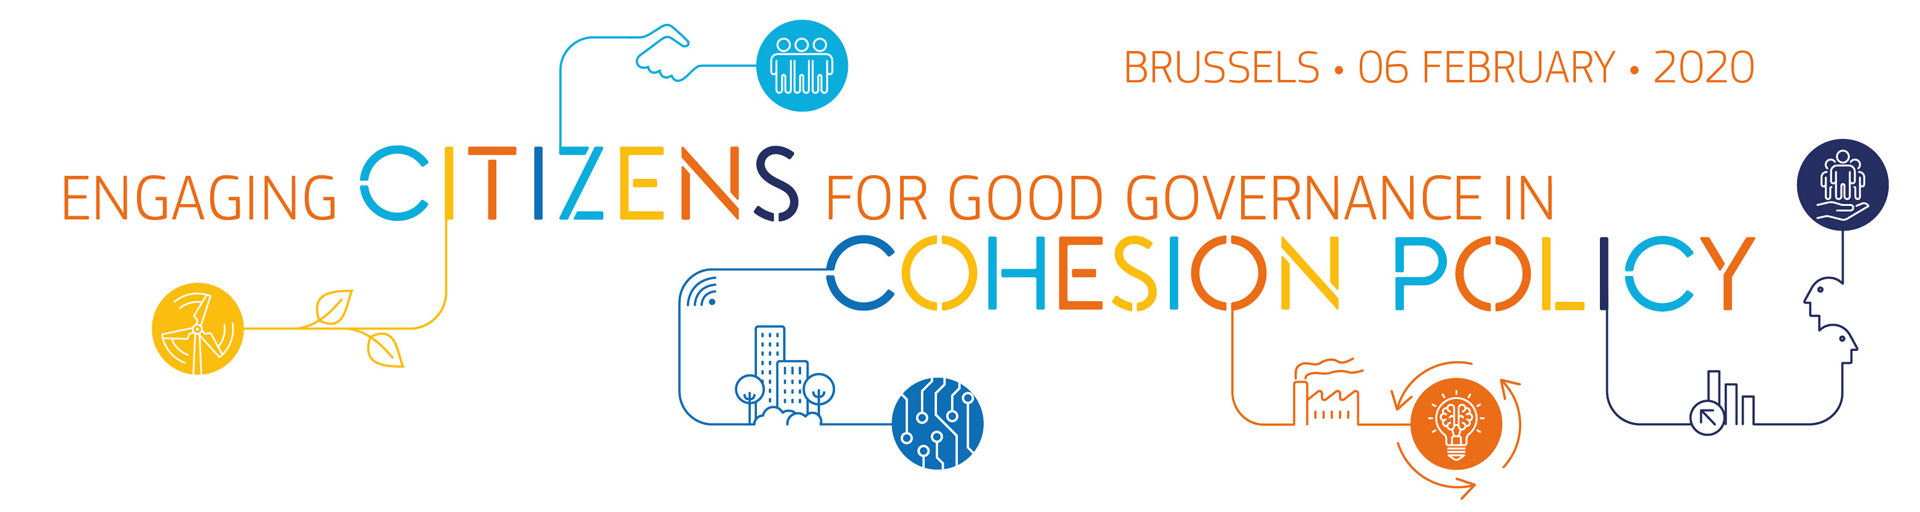 Engaging citizens for good governance in Cohesion Policy